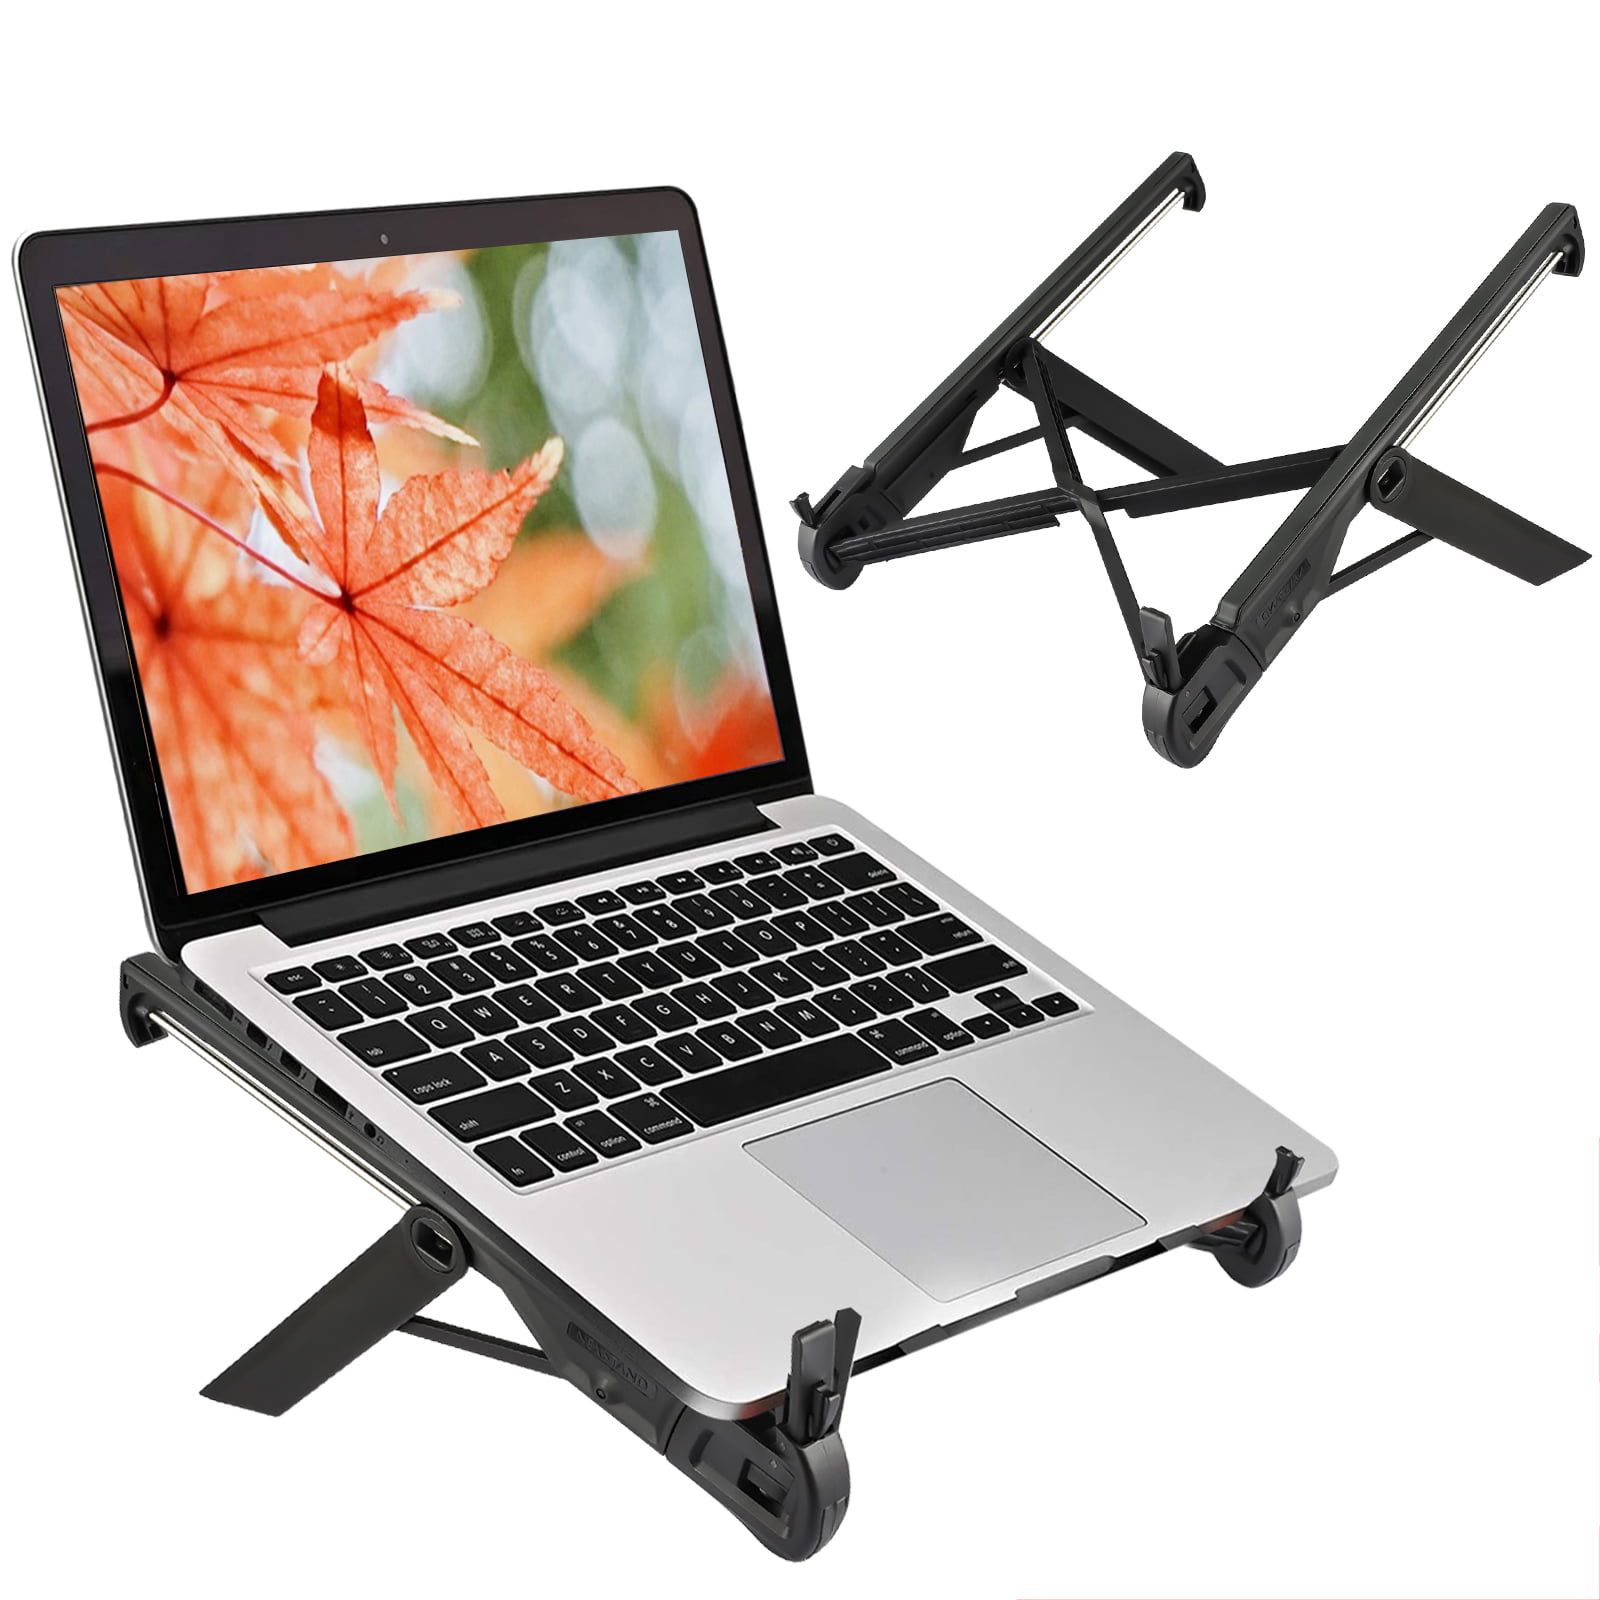 I want to fly freely Notebook Computer Stand Universal Portable Desktop Aluminum Alloy Computer Stand Multi-Function Folding Stand Tablet Computer Stand Color:A（ Pack of 2） 